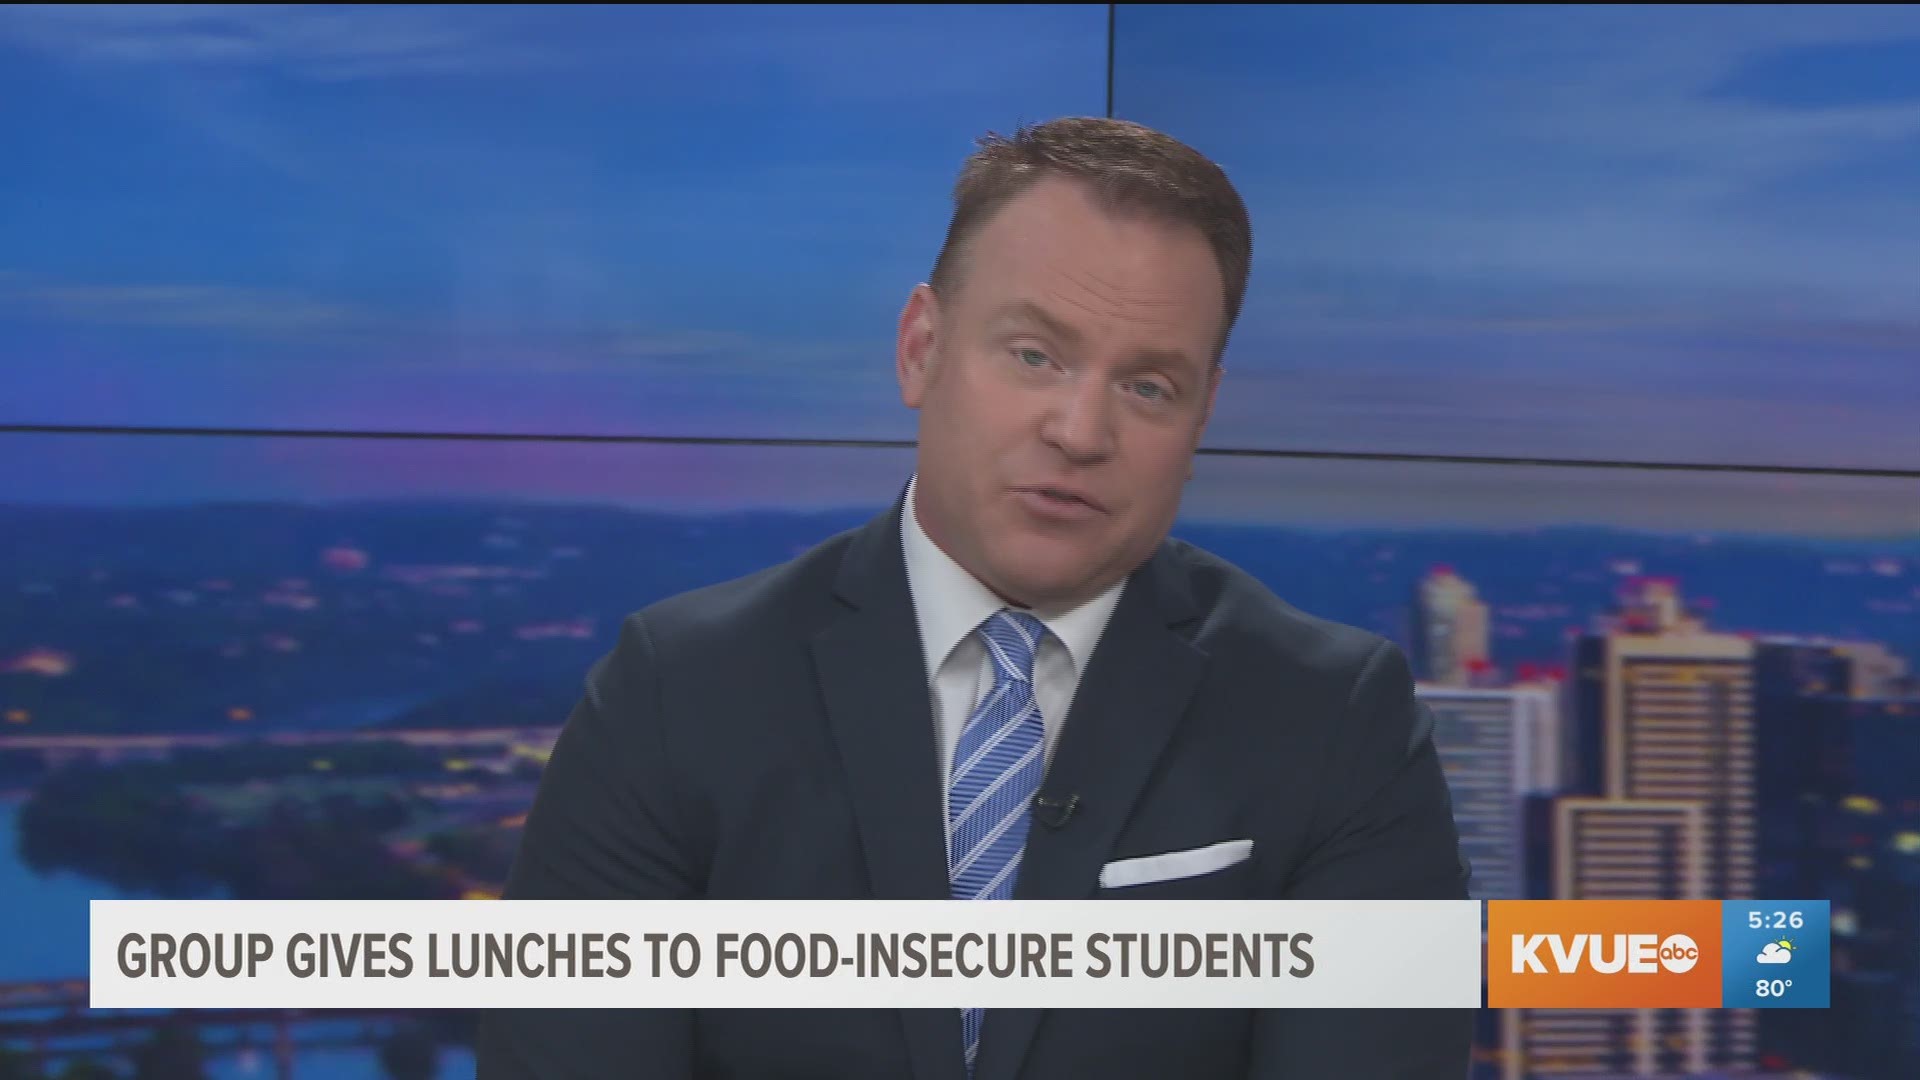 A group provides meals for food-insecure students.